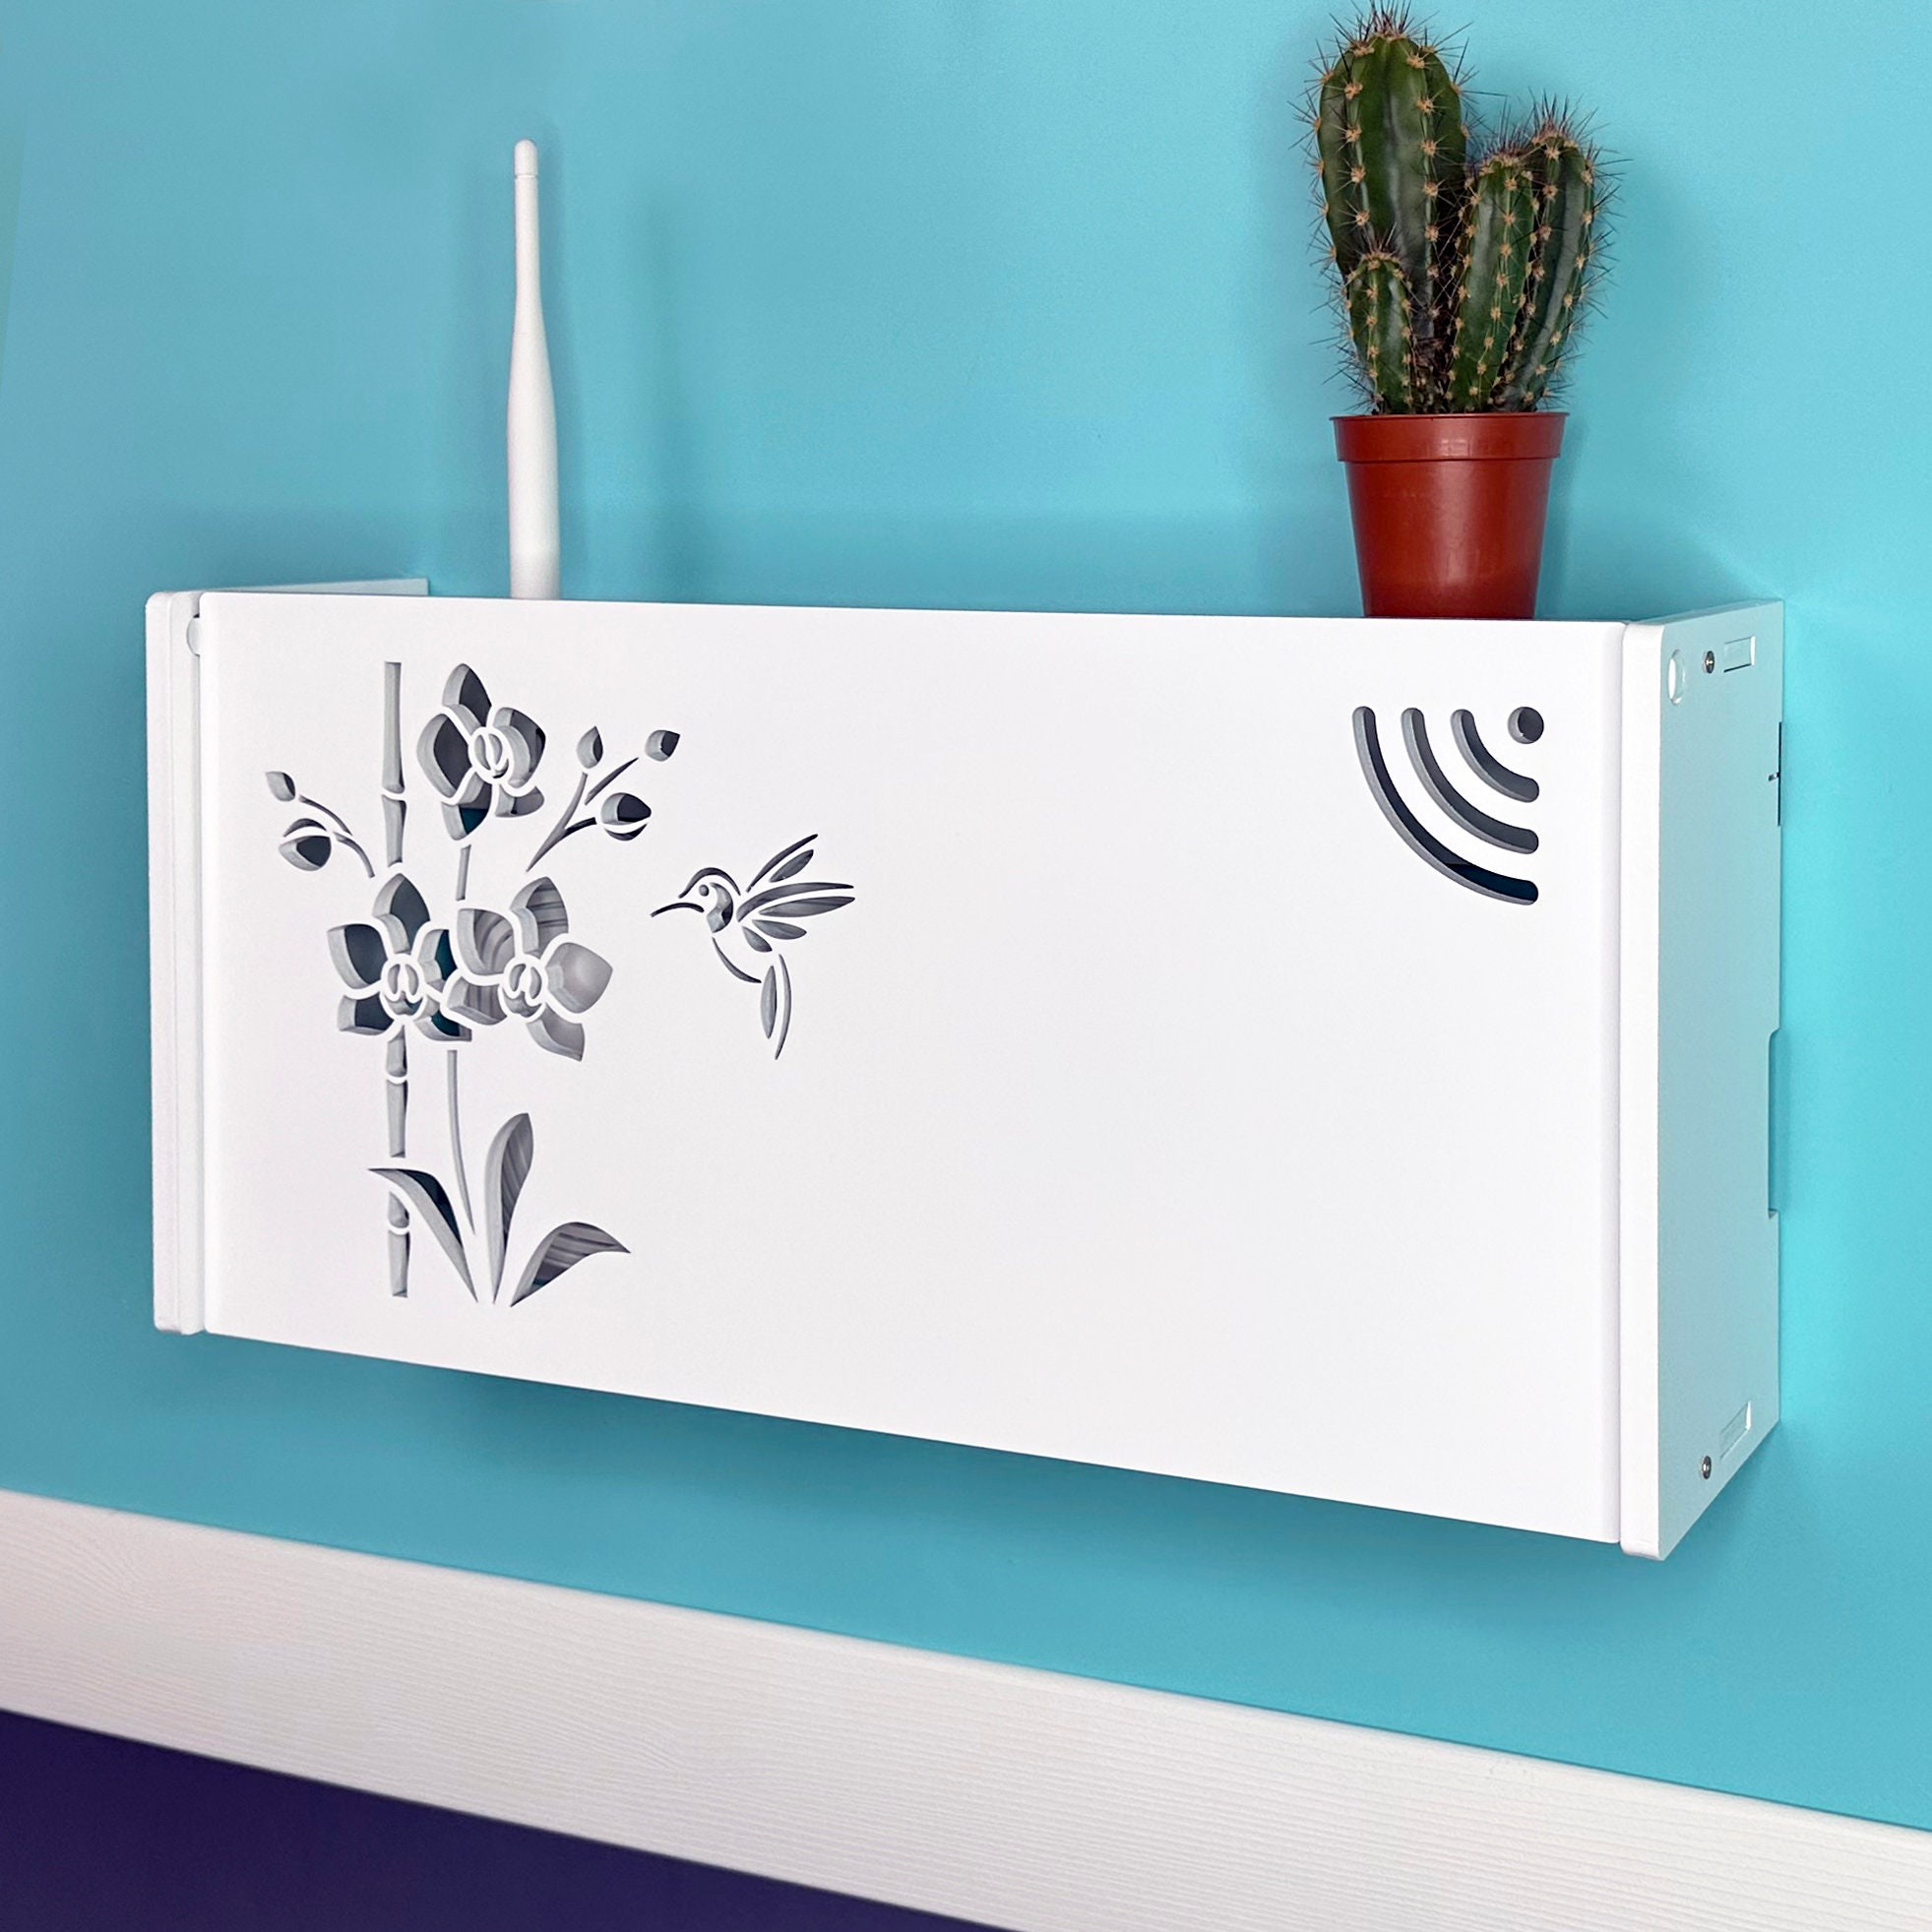 Wifi router storage box -  France